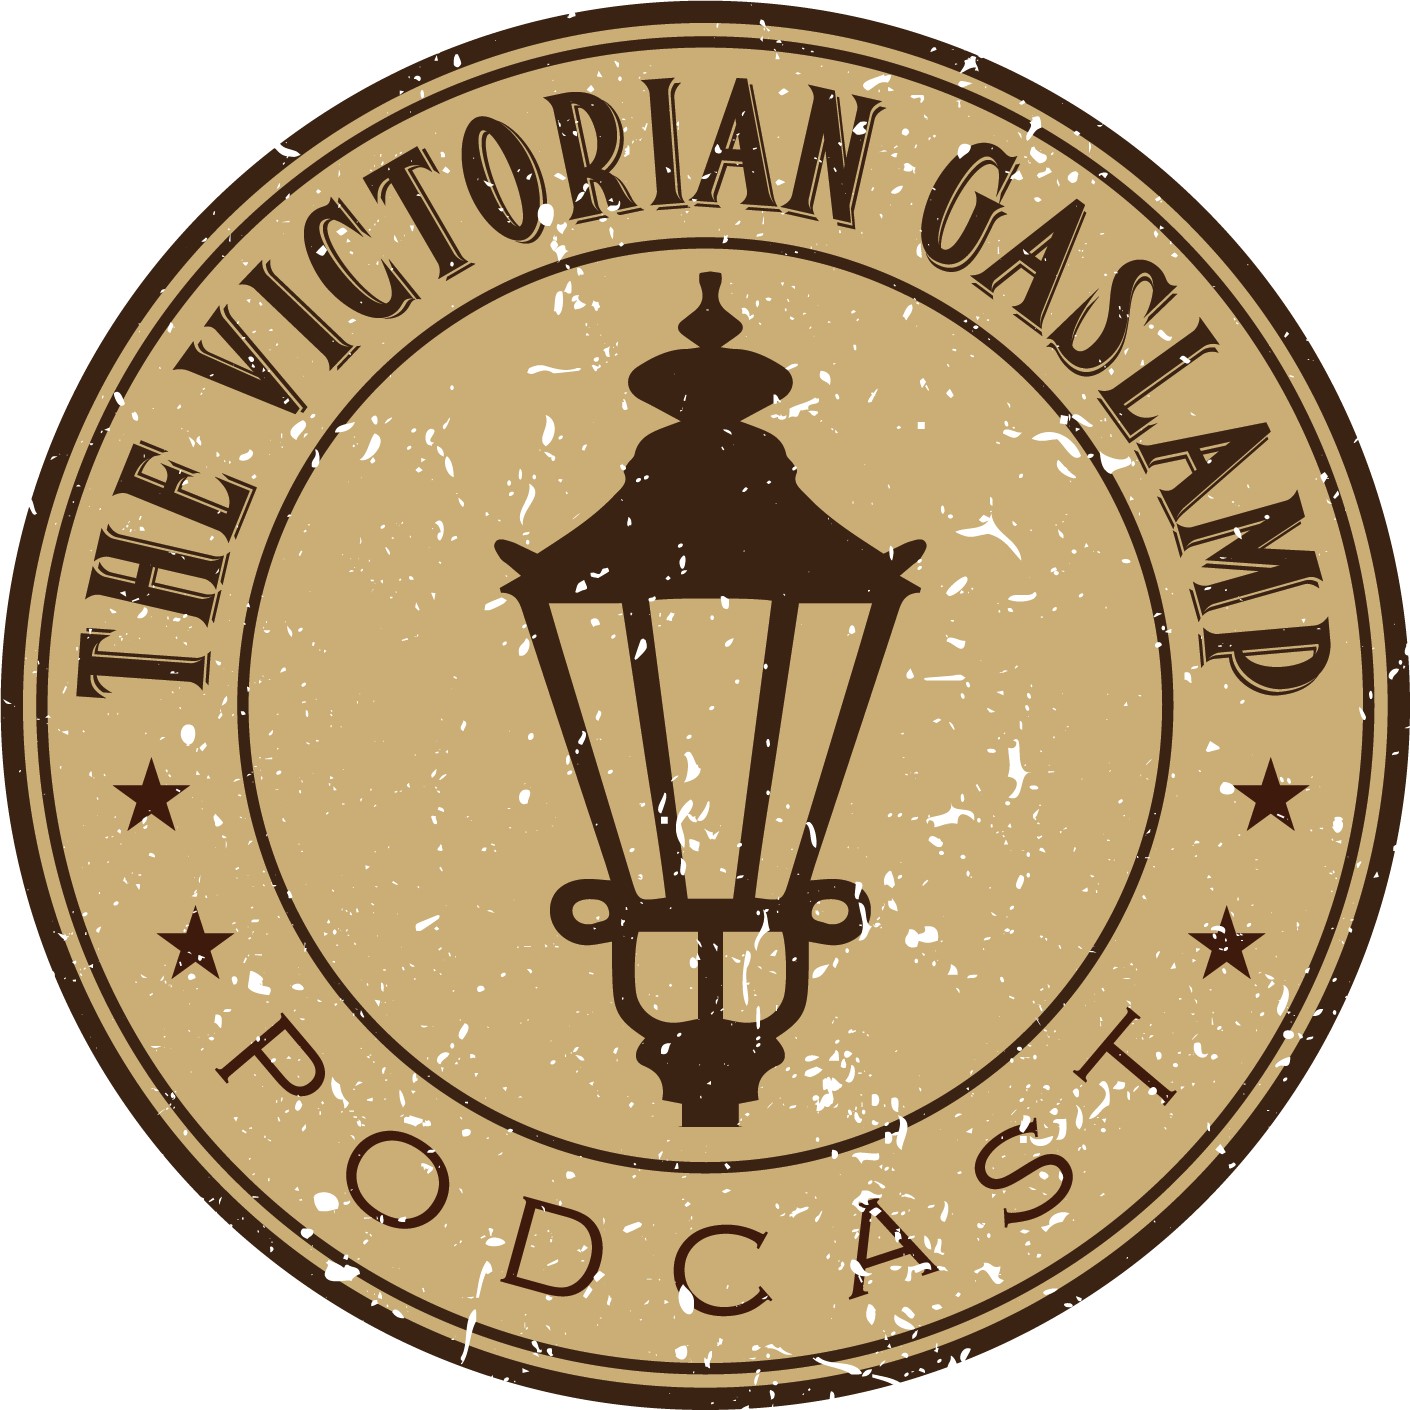 The Victorian Gaslamp Podcast